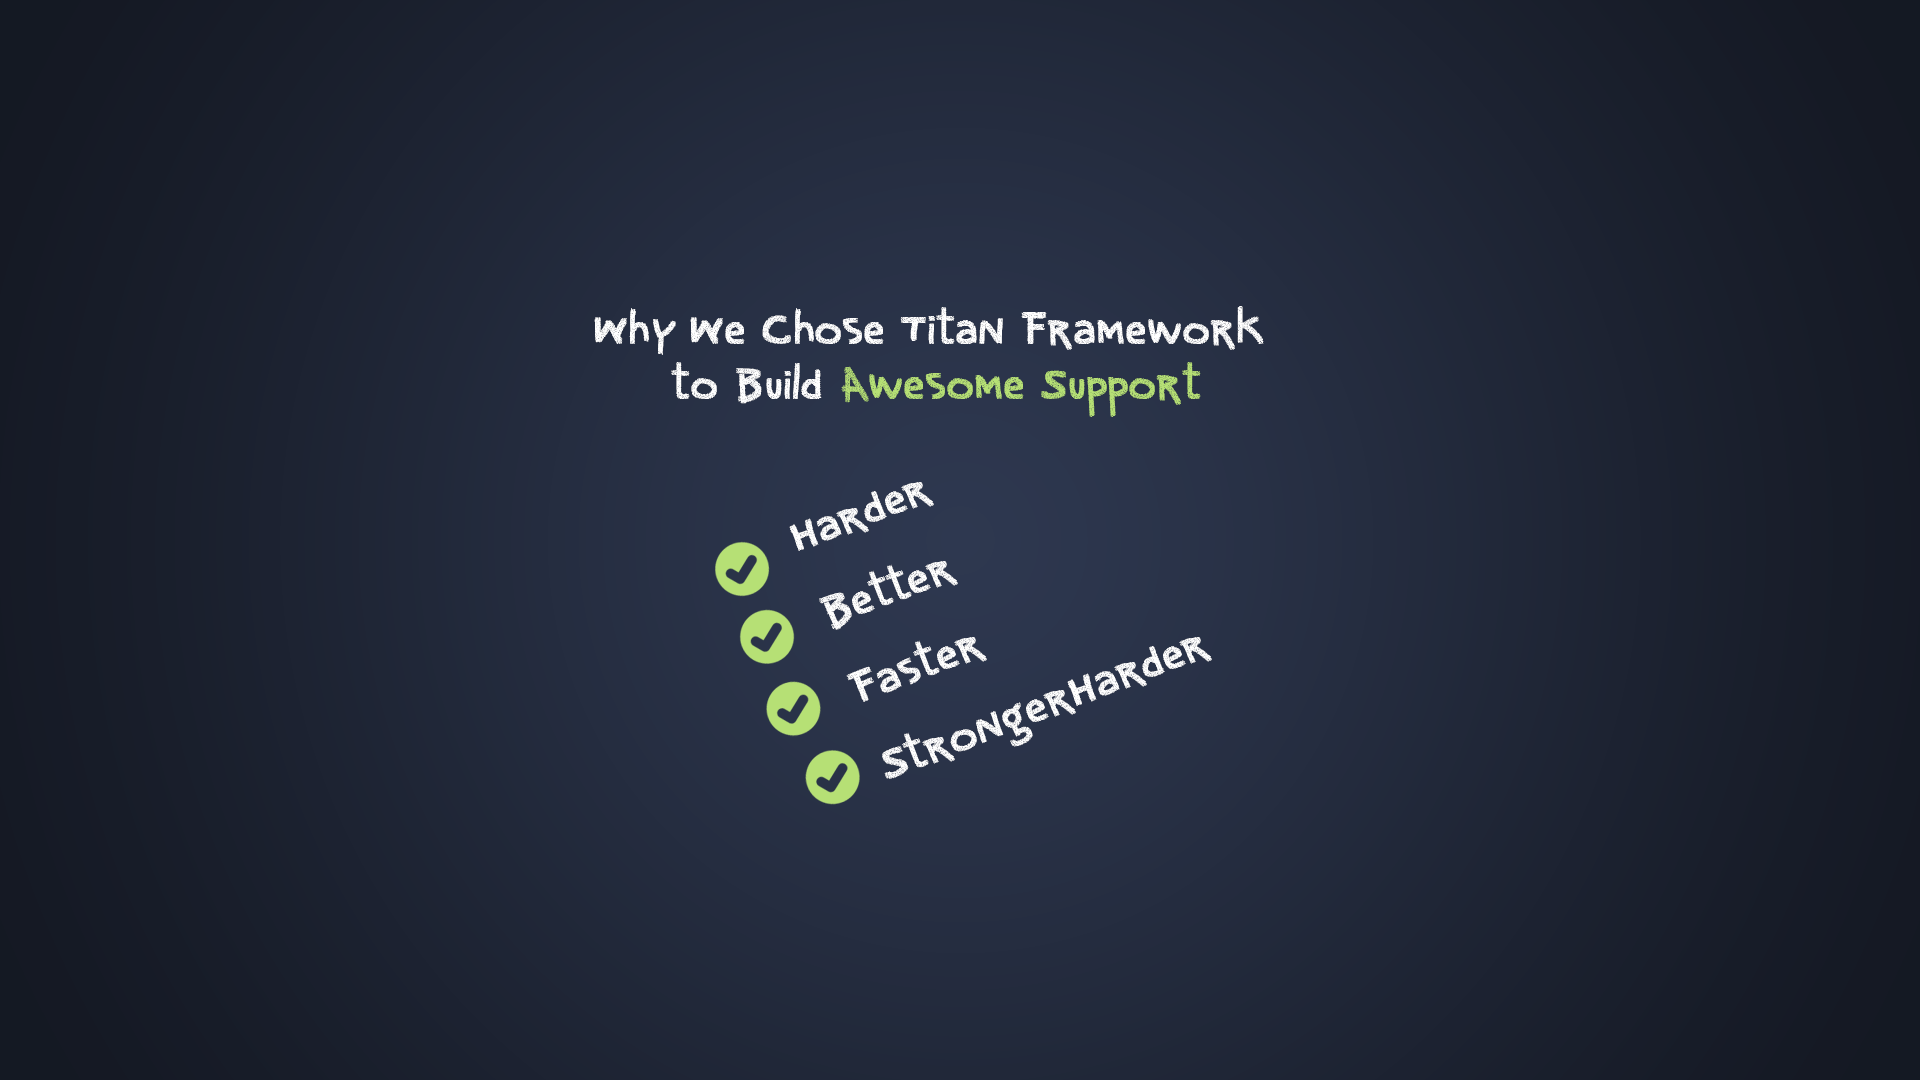 Why We Chose Titan Framework to Build Awesome Support